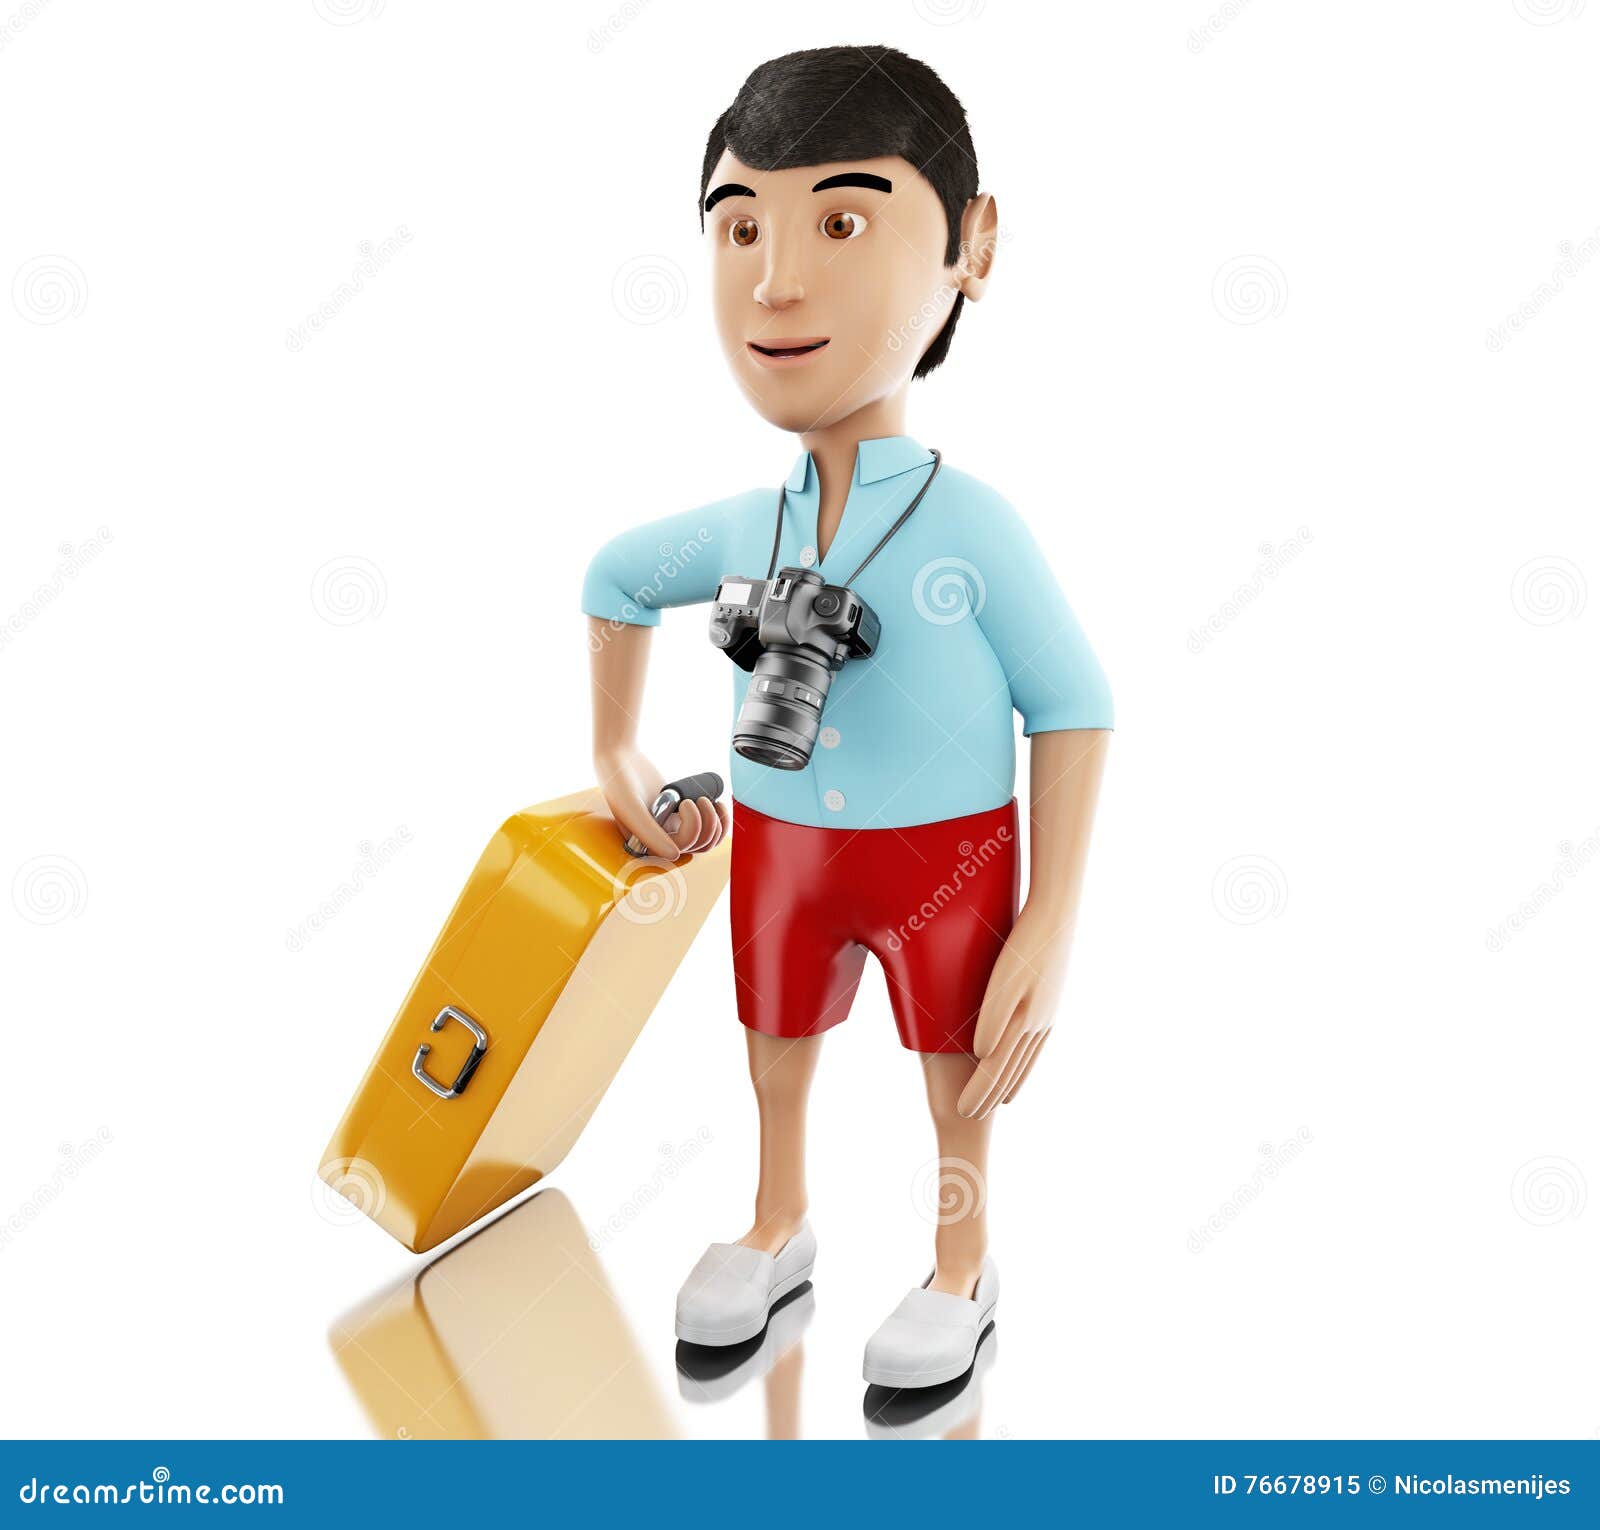 3d Man with a suitcase and a camera. 3d renderer image. Man with a suitcase and a camera goes on vacation. Travel and holidays concept. Isolated white background.